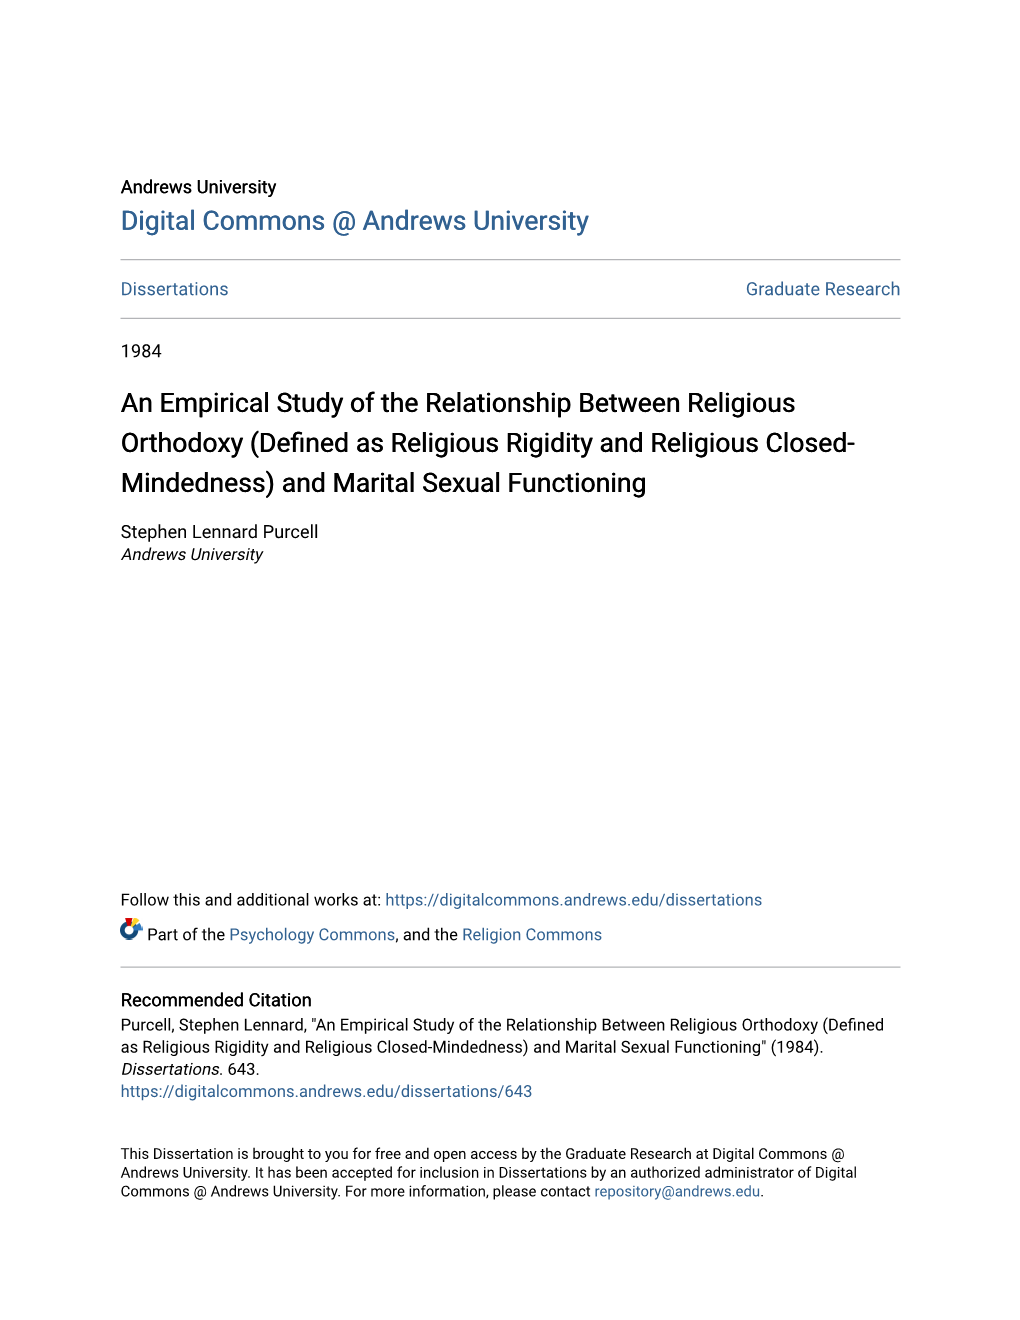 An Empirical Study of the Relationship Between Religious Orthodoxy (Defined As Religious Rigidity and Religious Closed- Mindedness) and Marital Sexual Functioning